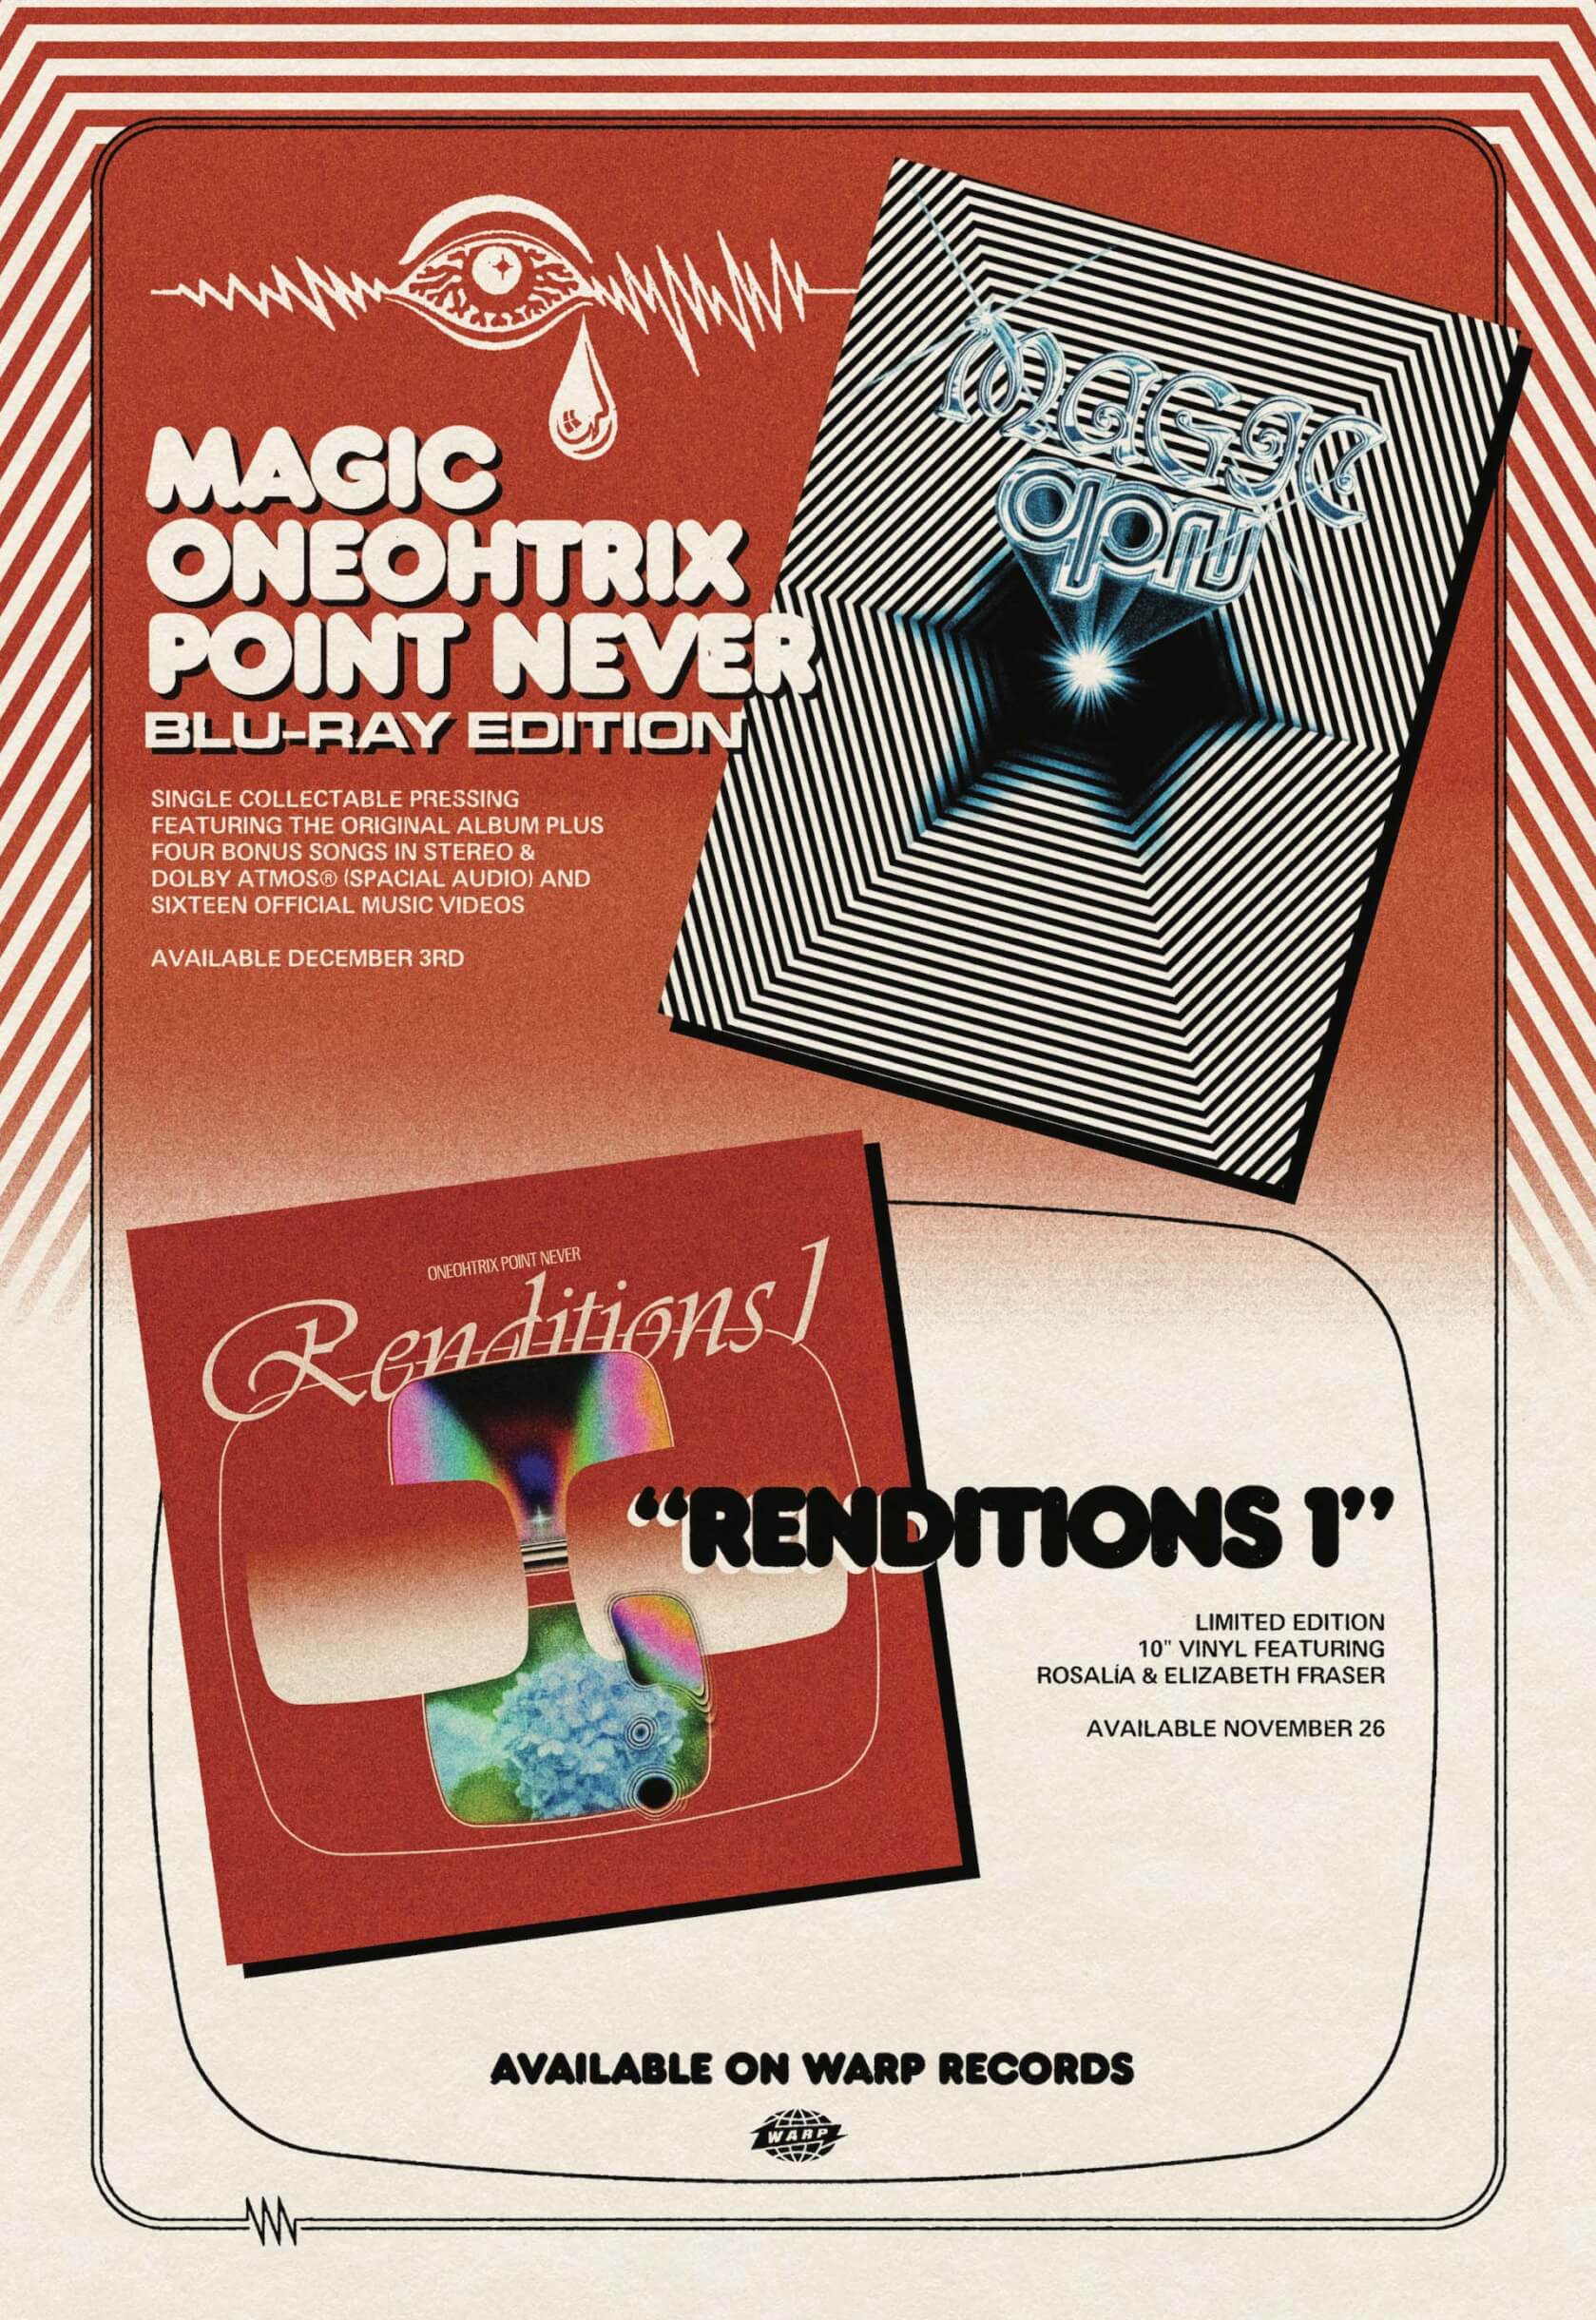 Oneohtrix Point Neverのレコード・ストア・デイ限定作品『RENDITIONS I』がリリース！『Magic Oneohtrix Point Never』のBlu-rayエディションも発売 music211129_opn_08jpg